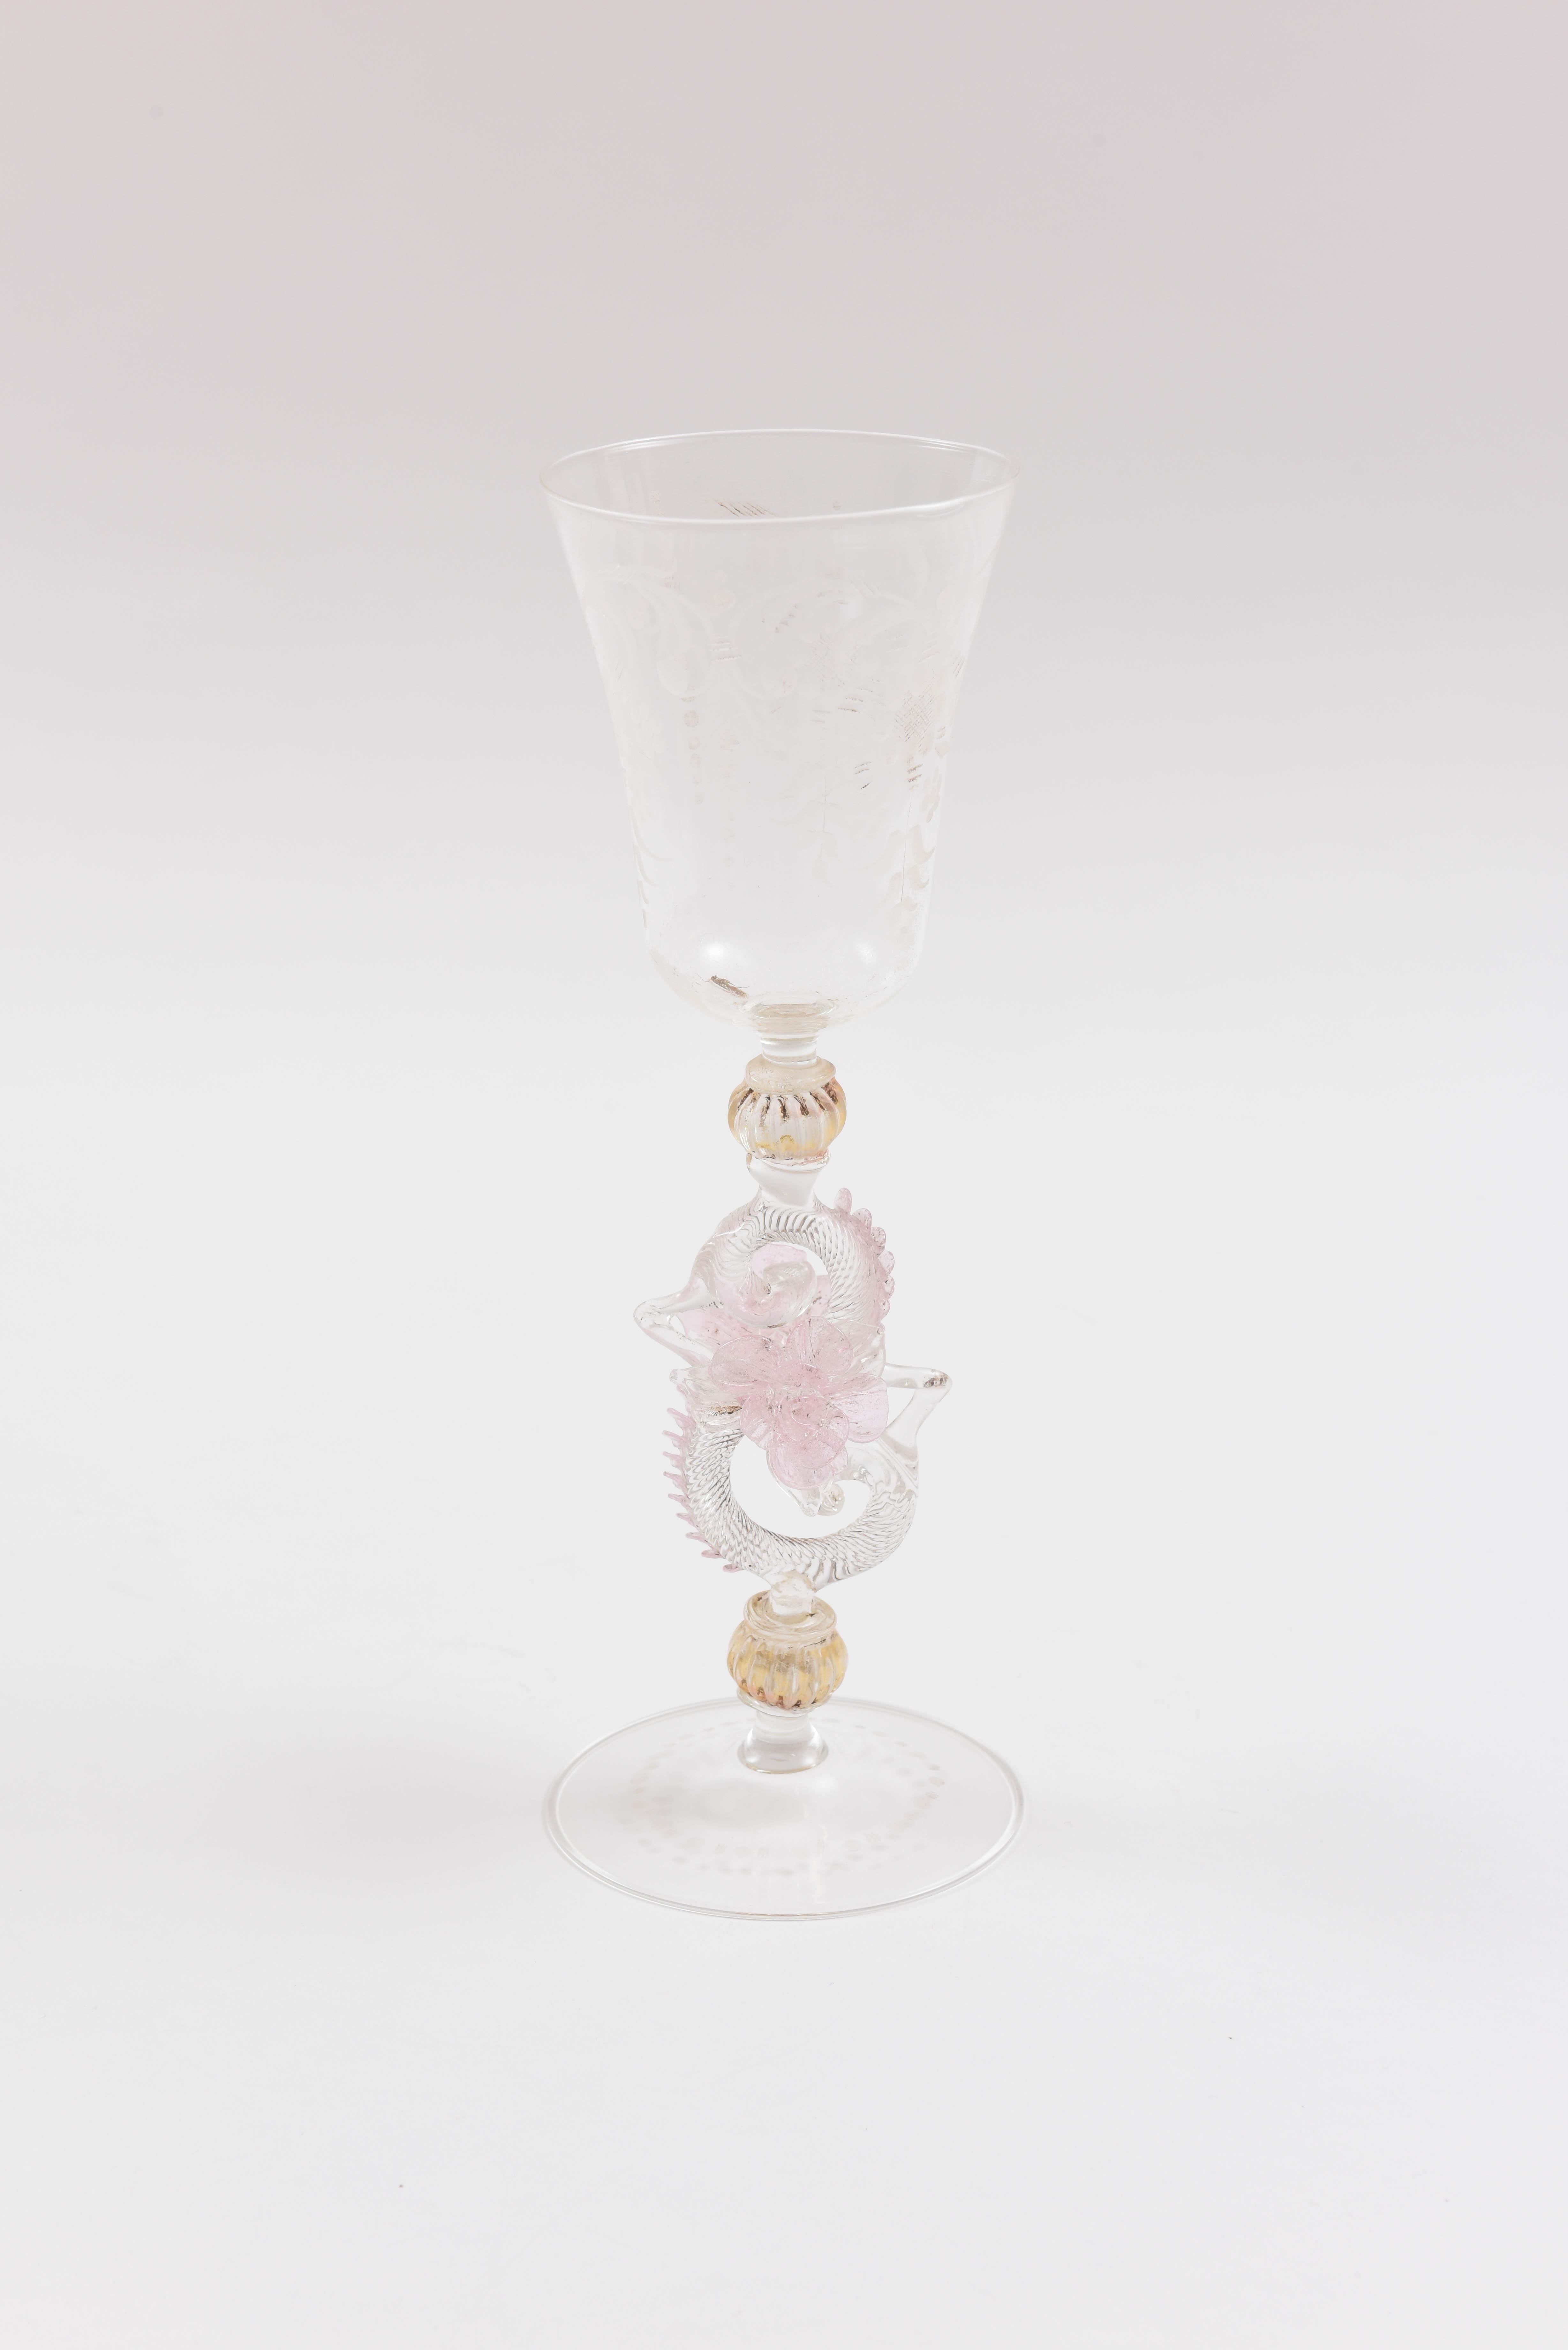 A substantial set of eight very tall goblets from the Isle of Murano, Venice. These feature beautifully blown shapes and extra attention has been made to the applied floral decoration throughout. They also have a nice double blown ball stem and are